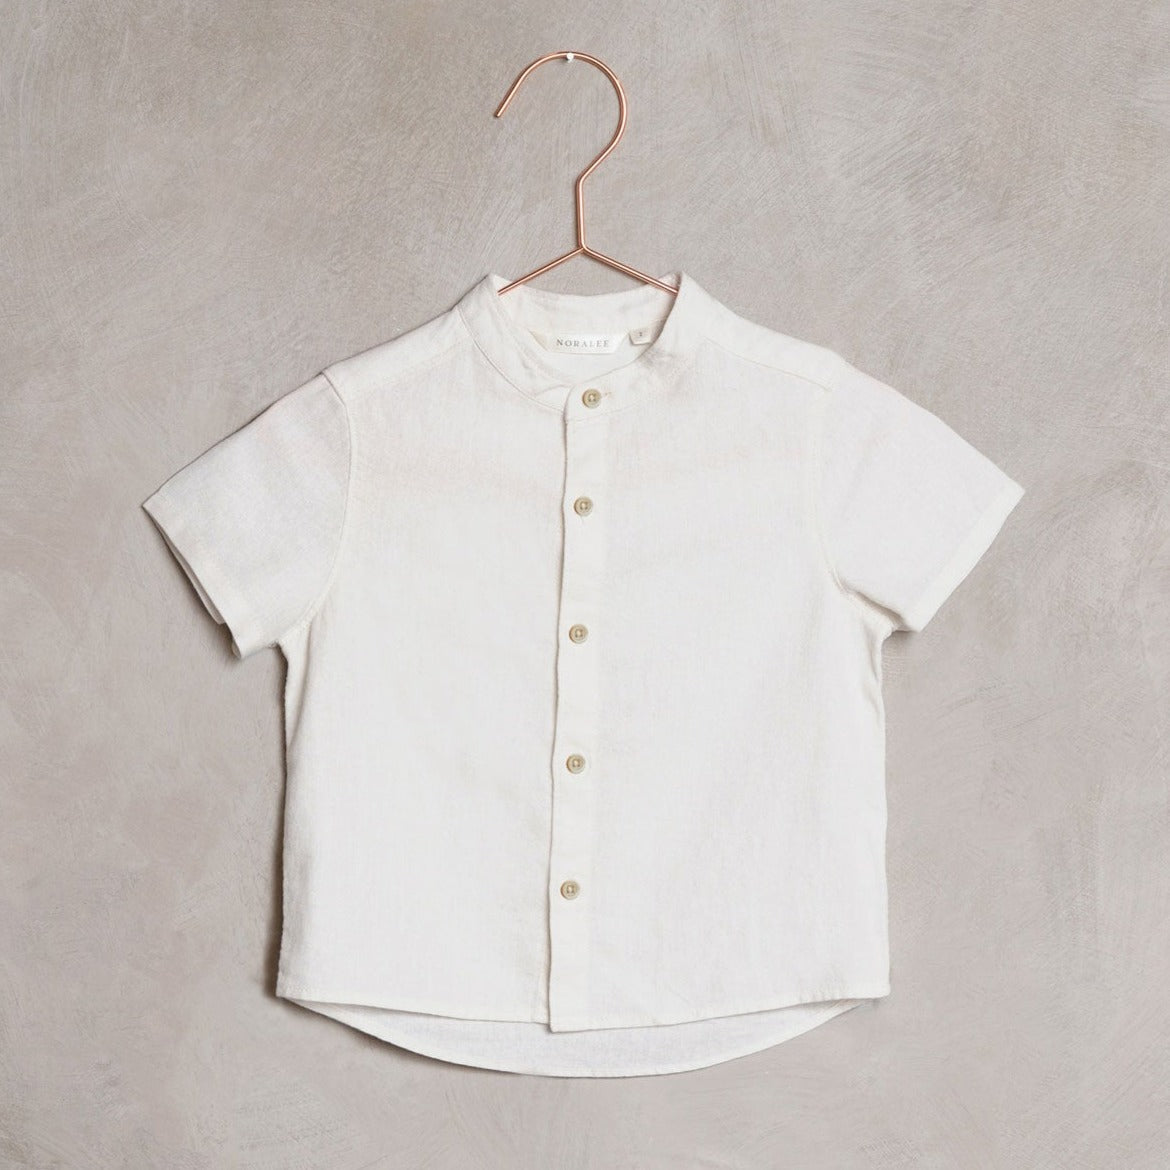 Noralee Archie Shirt - White SS23